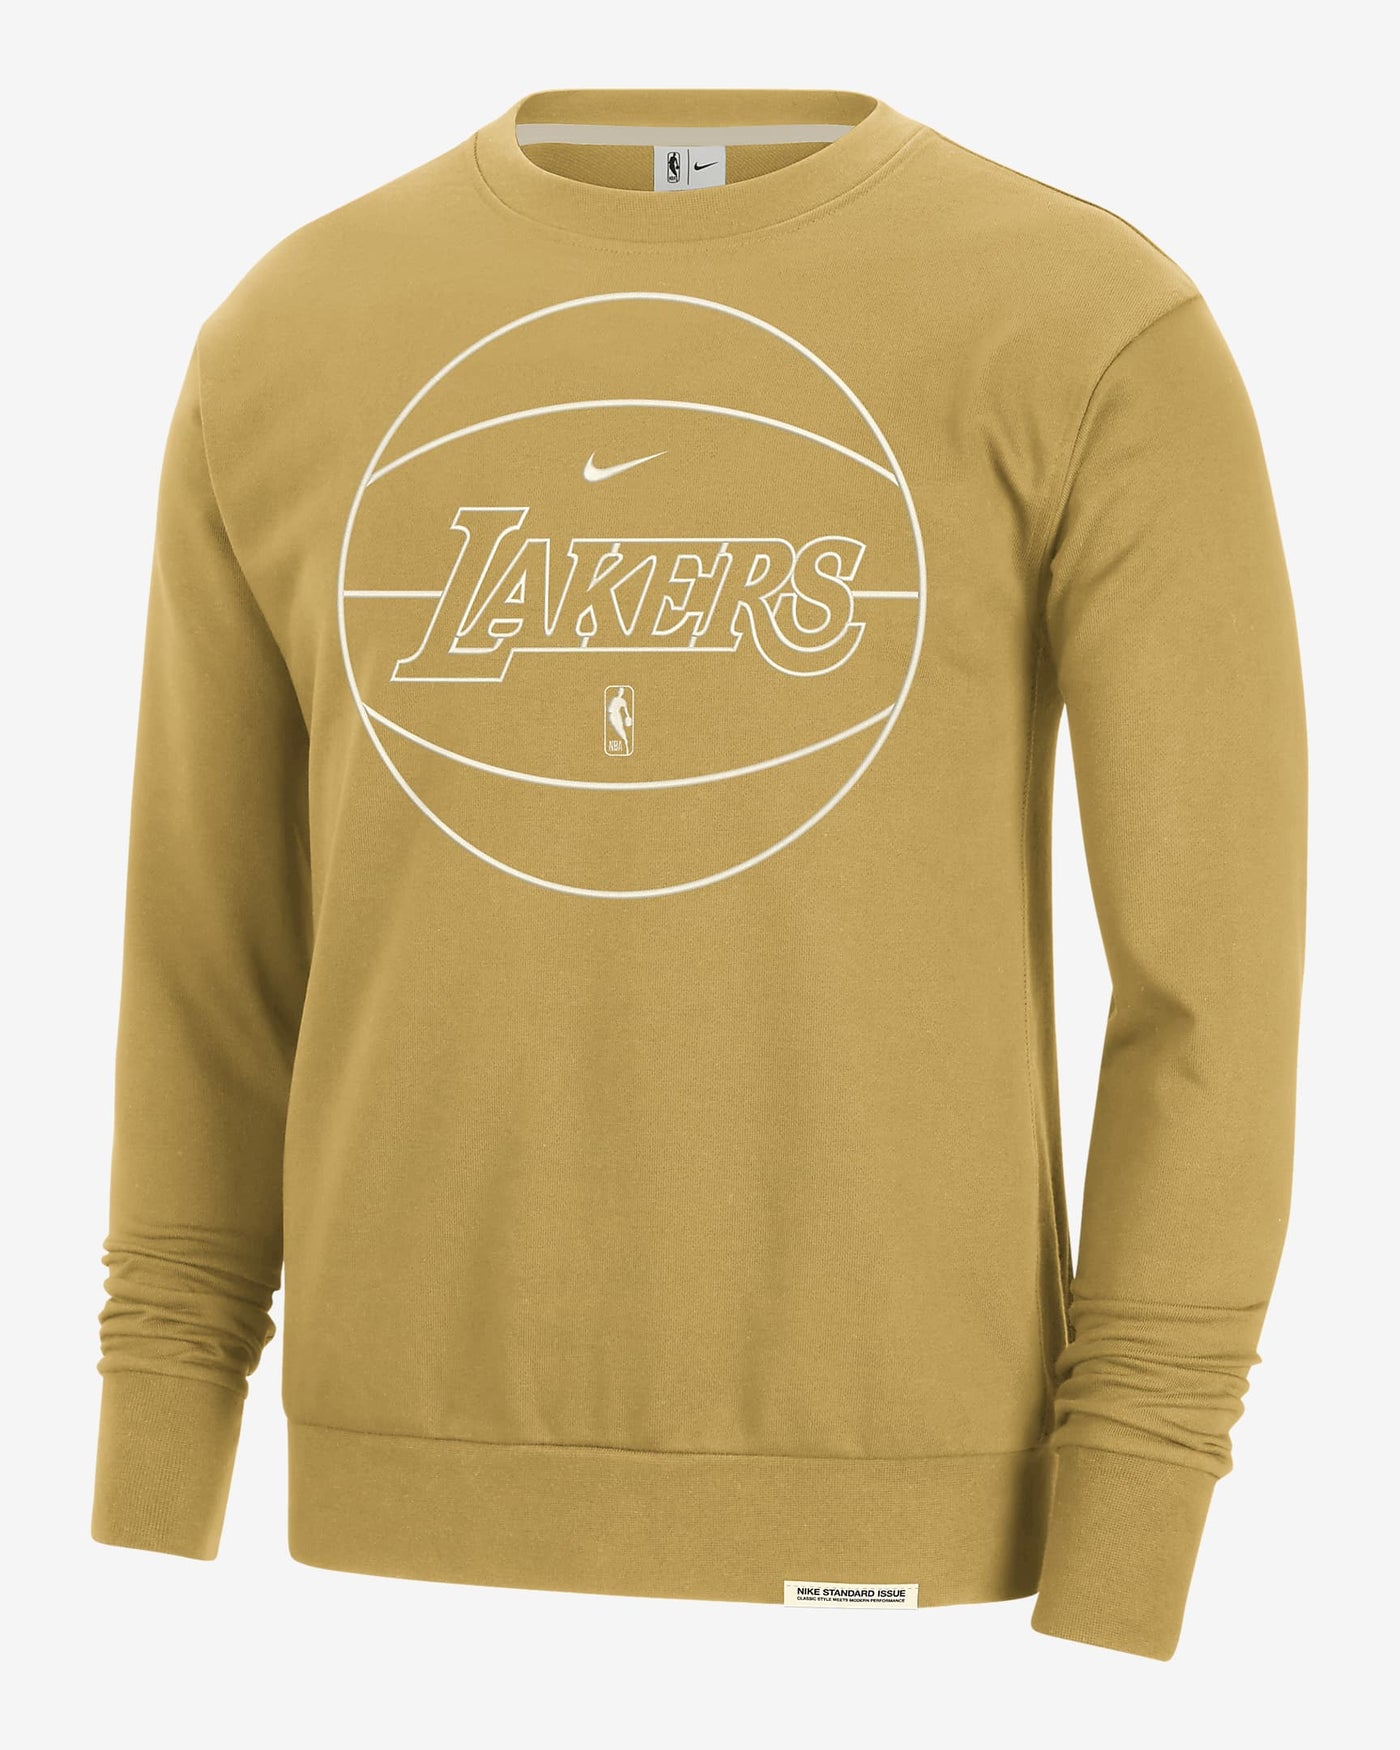 Mens Los Angeles Lakers Standard Issue T-Shirt